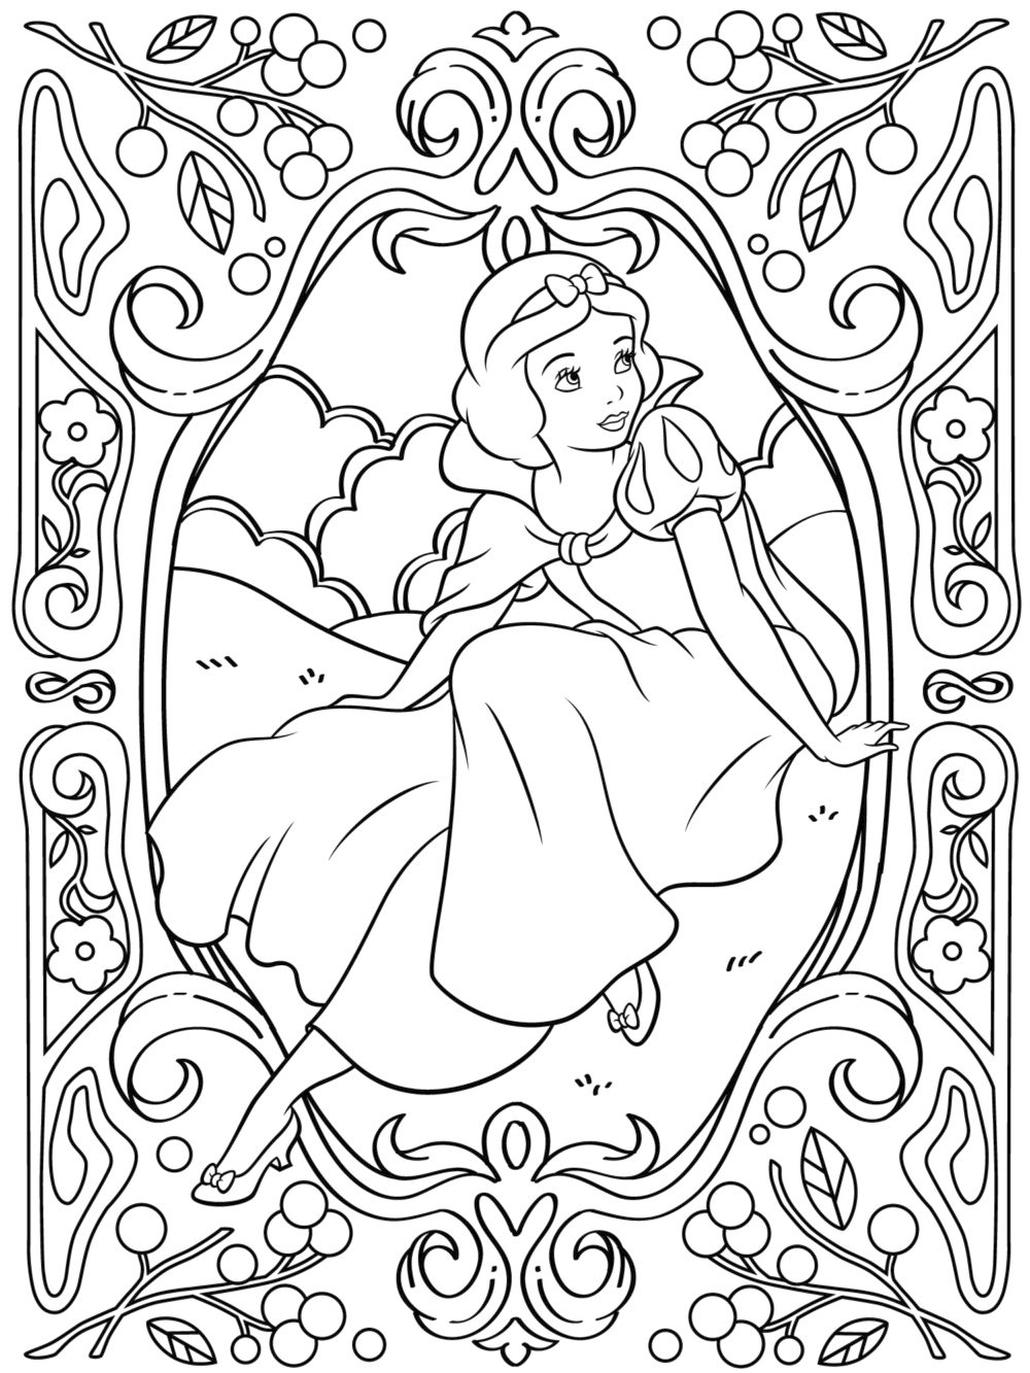 Get This Adult Coloring Pages Disney Beautiful Snow White Drawing